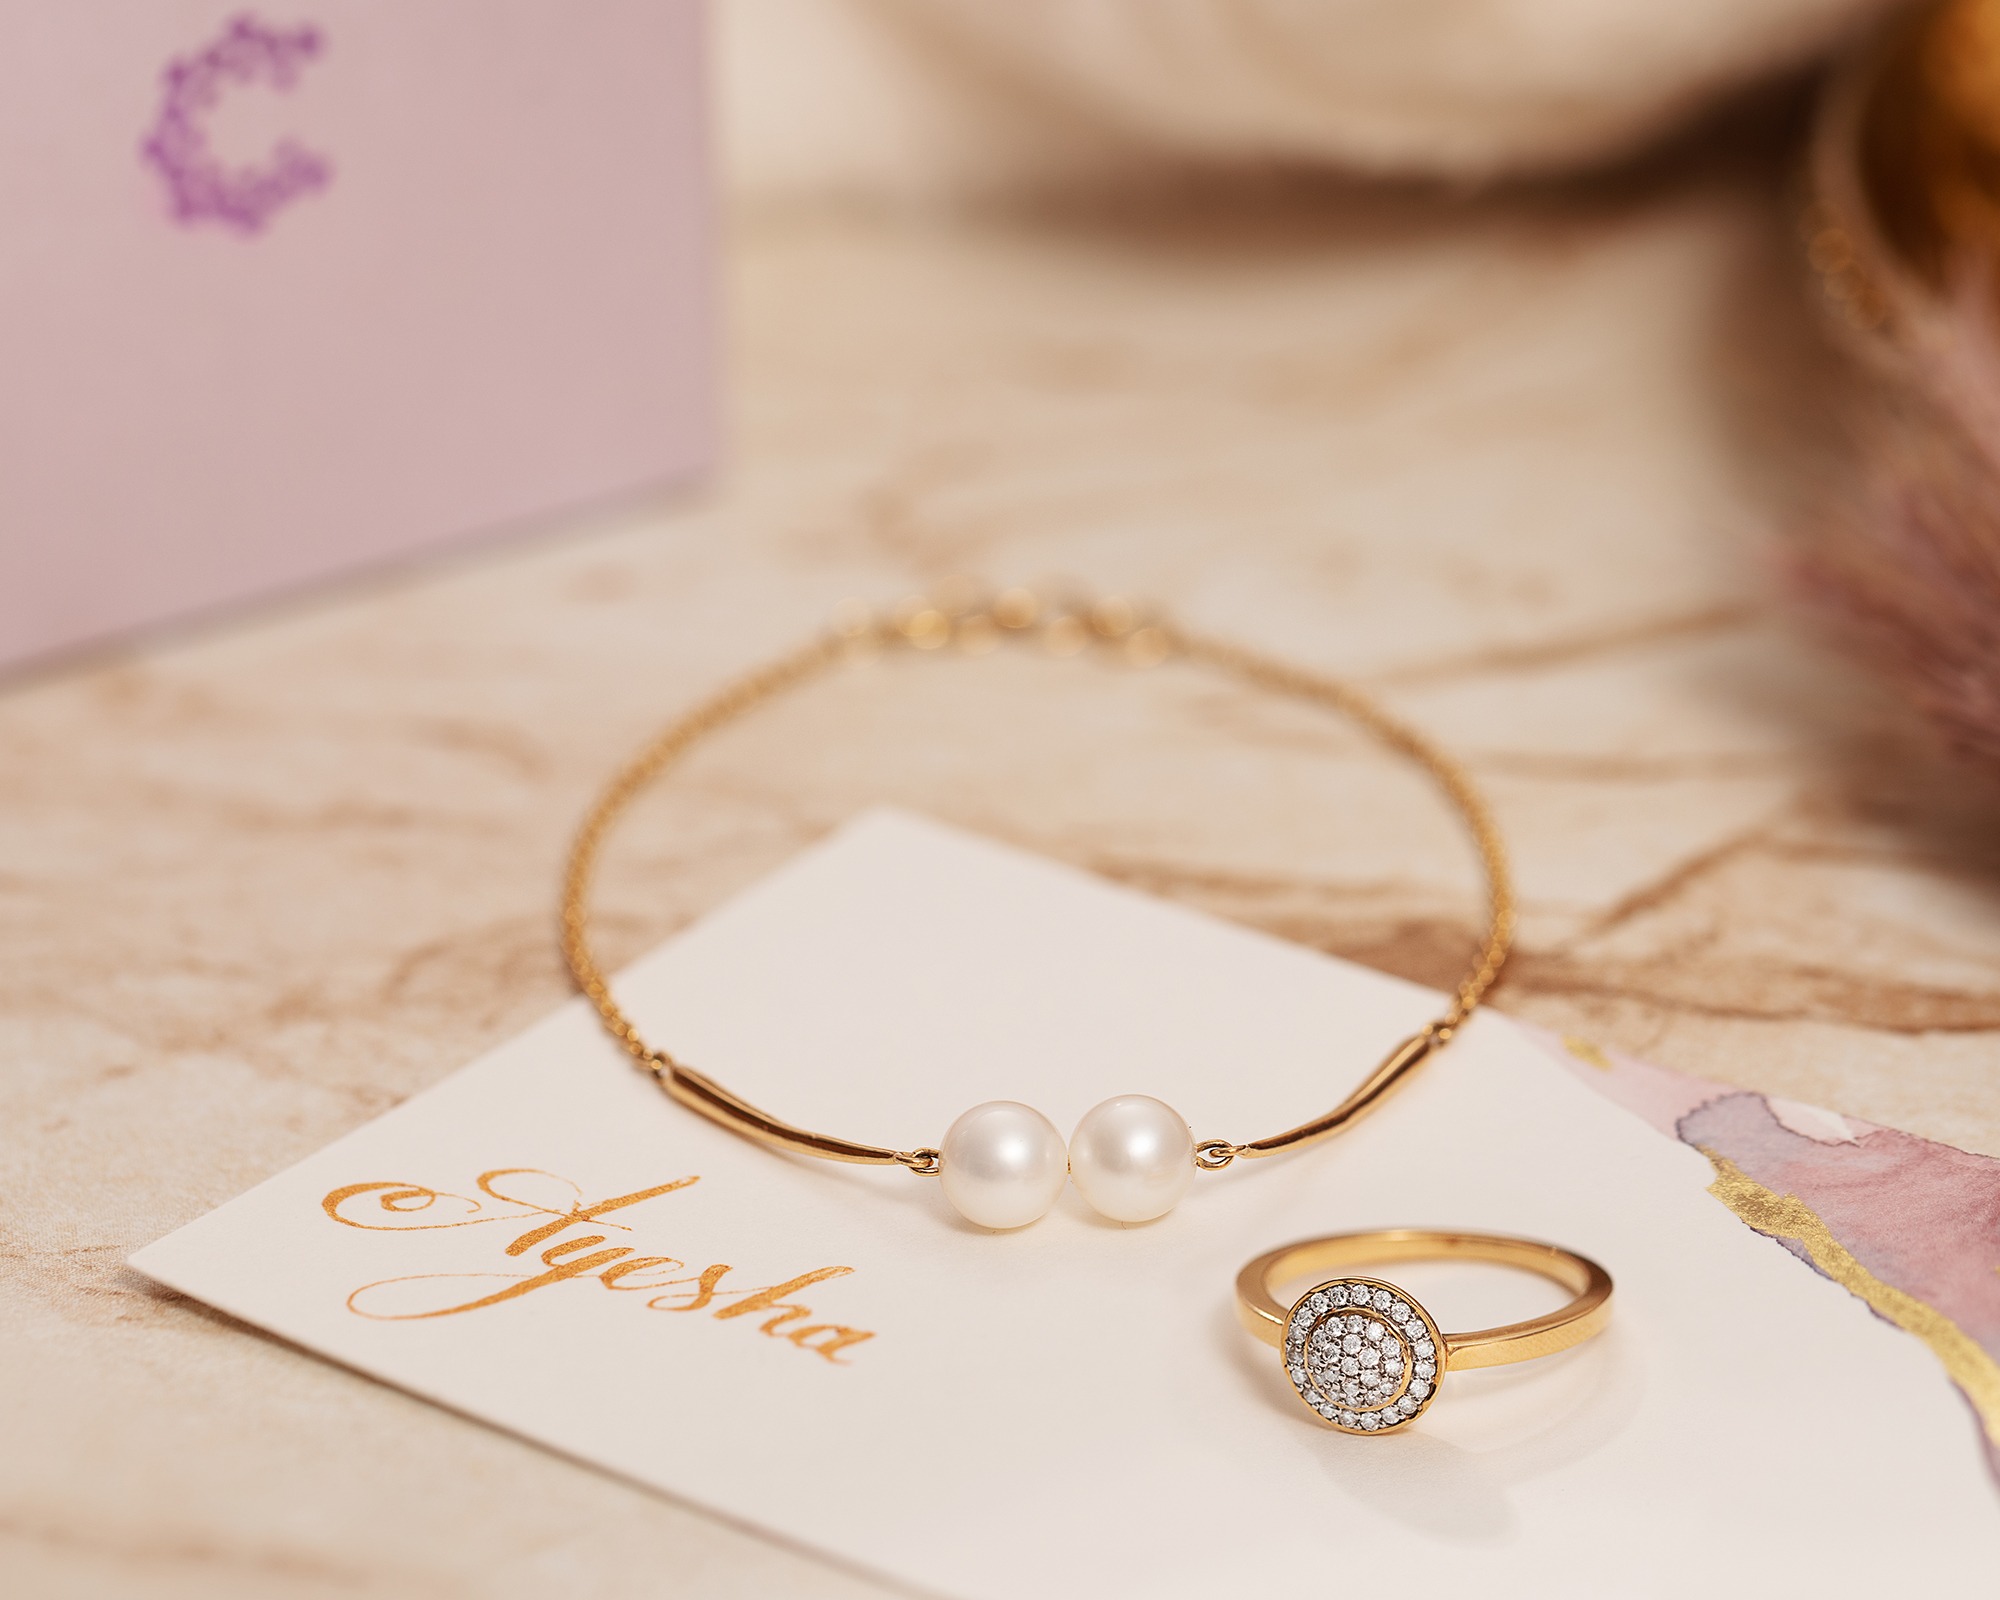 Simple and classy gifts for women's day